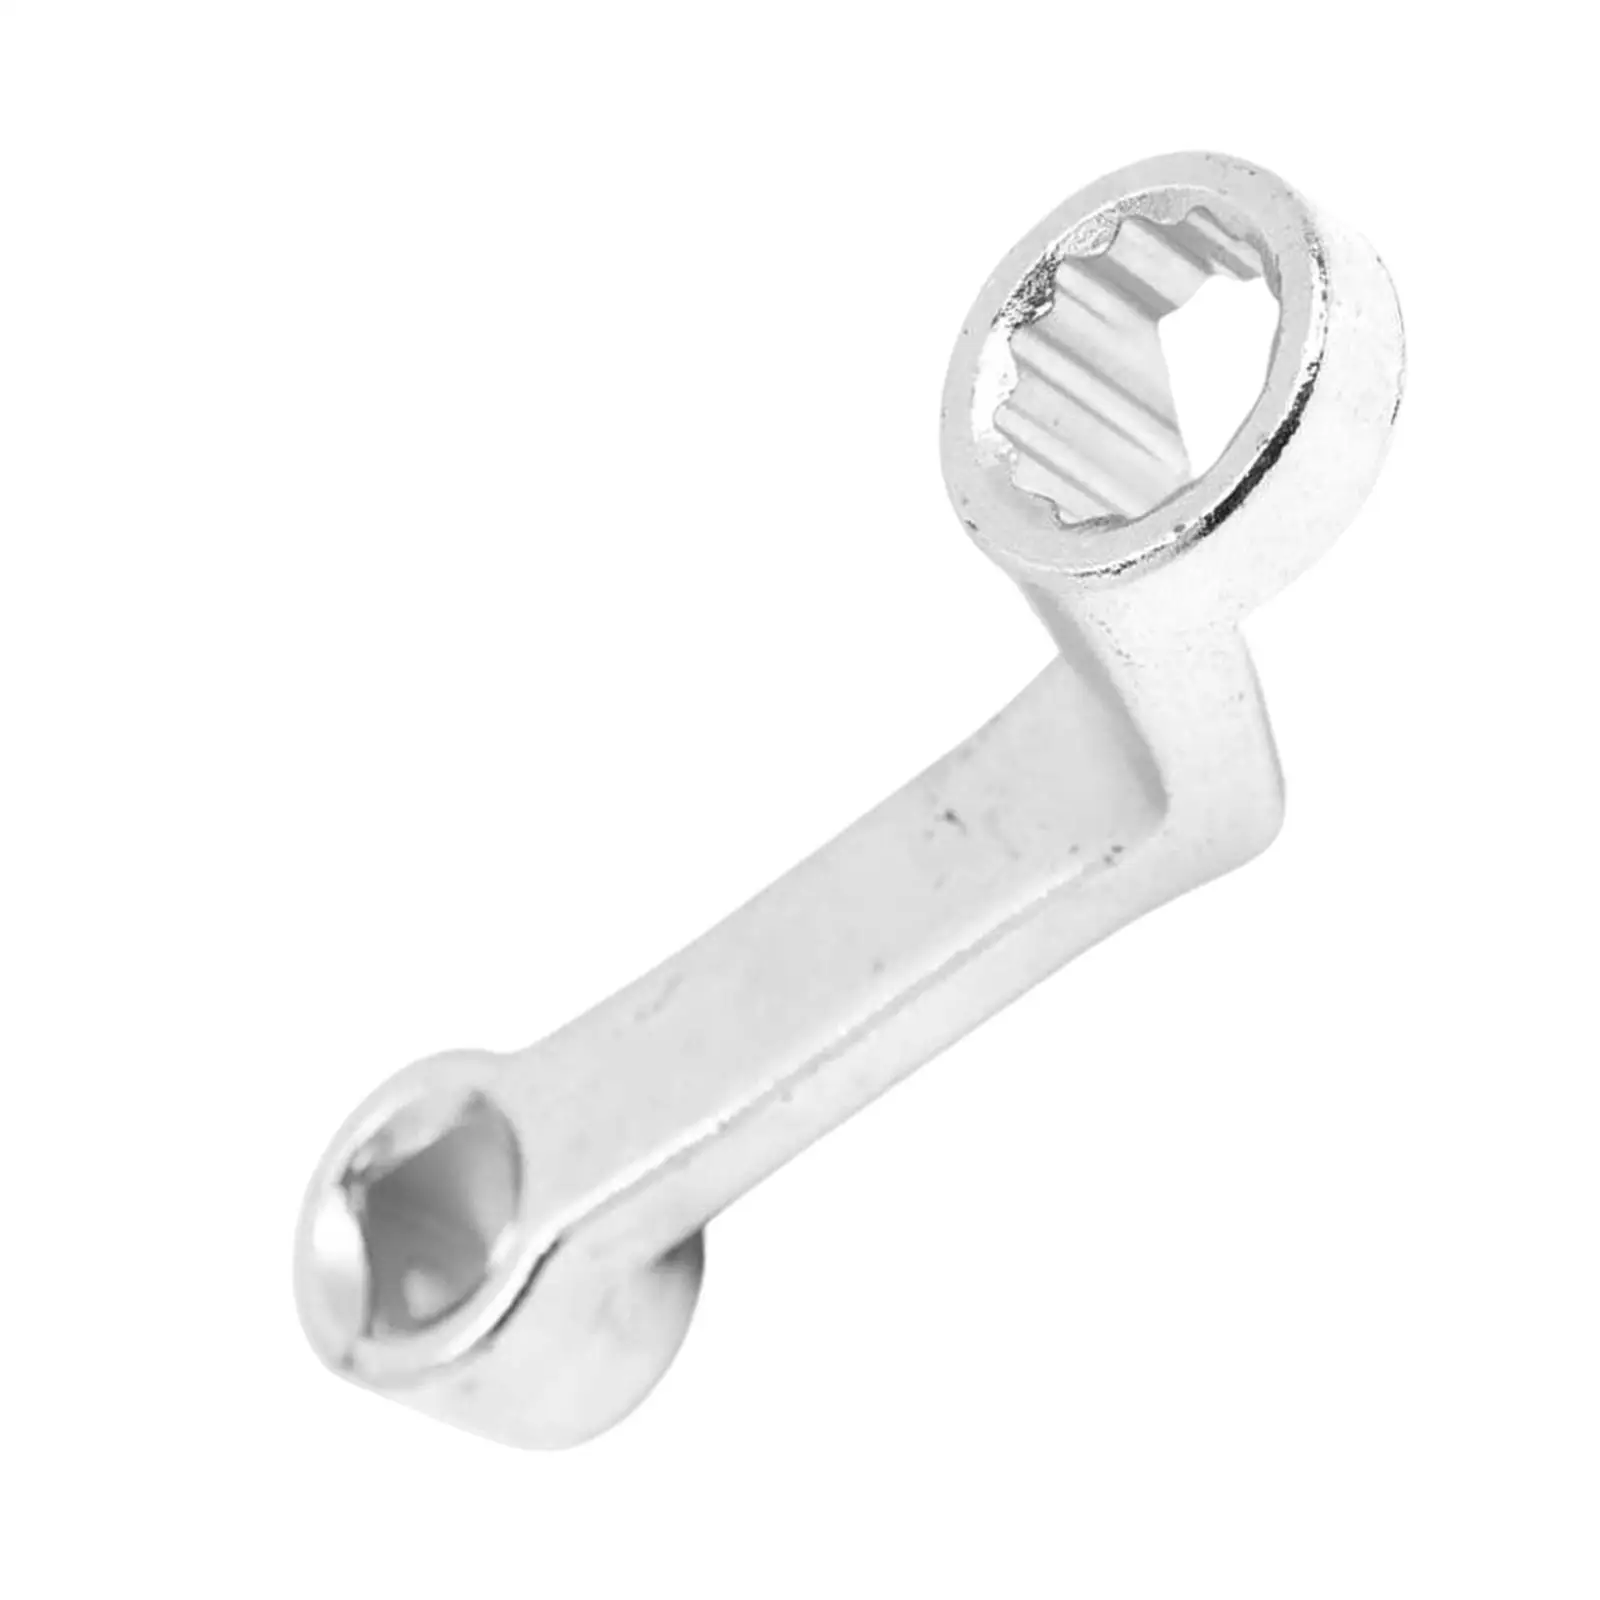 18mm Camber Adjusting Wrench T10179 Steel Rear Axle Camber Adjustment Wrench